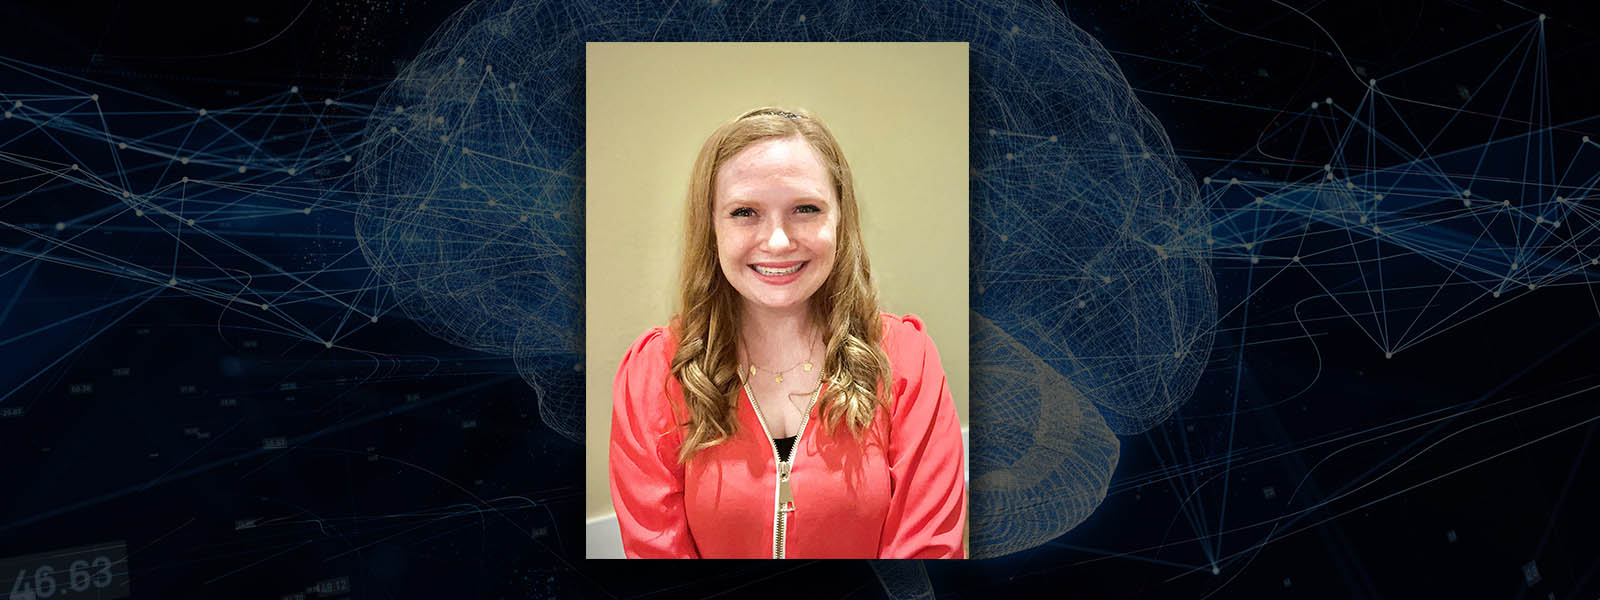 Photo of Lindsey Carnes, Ph.D., neuropsychology faculty member